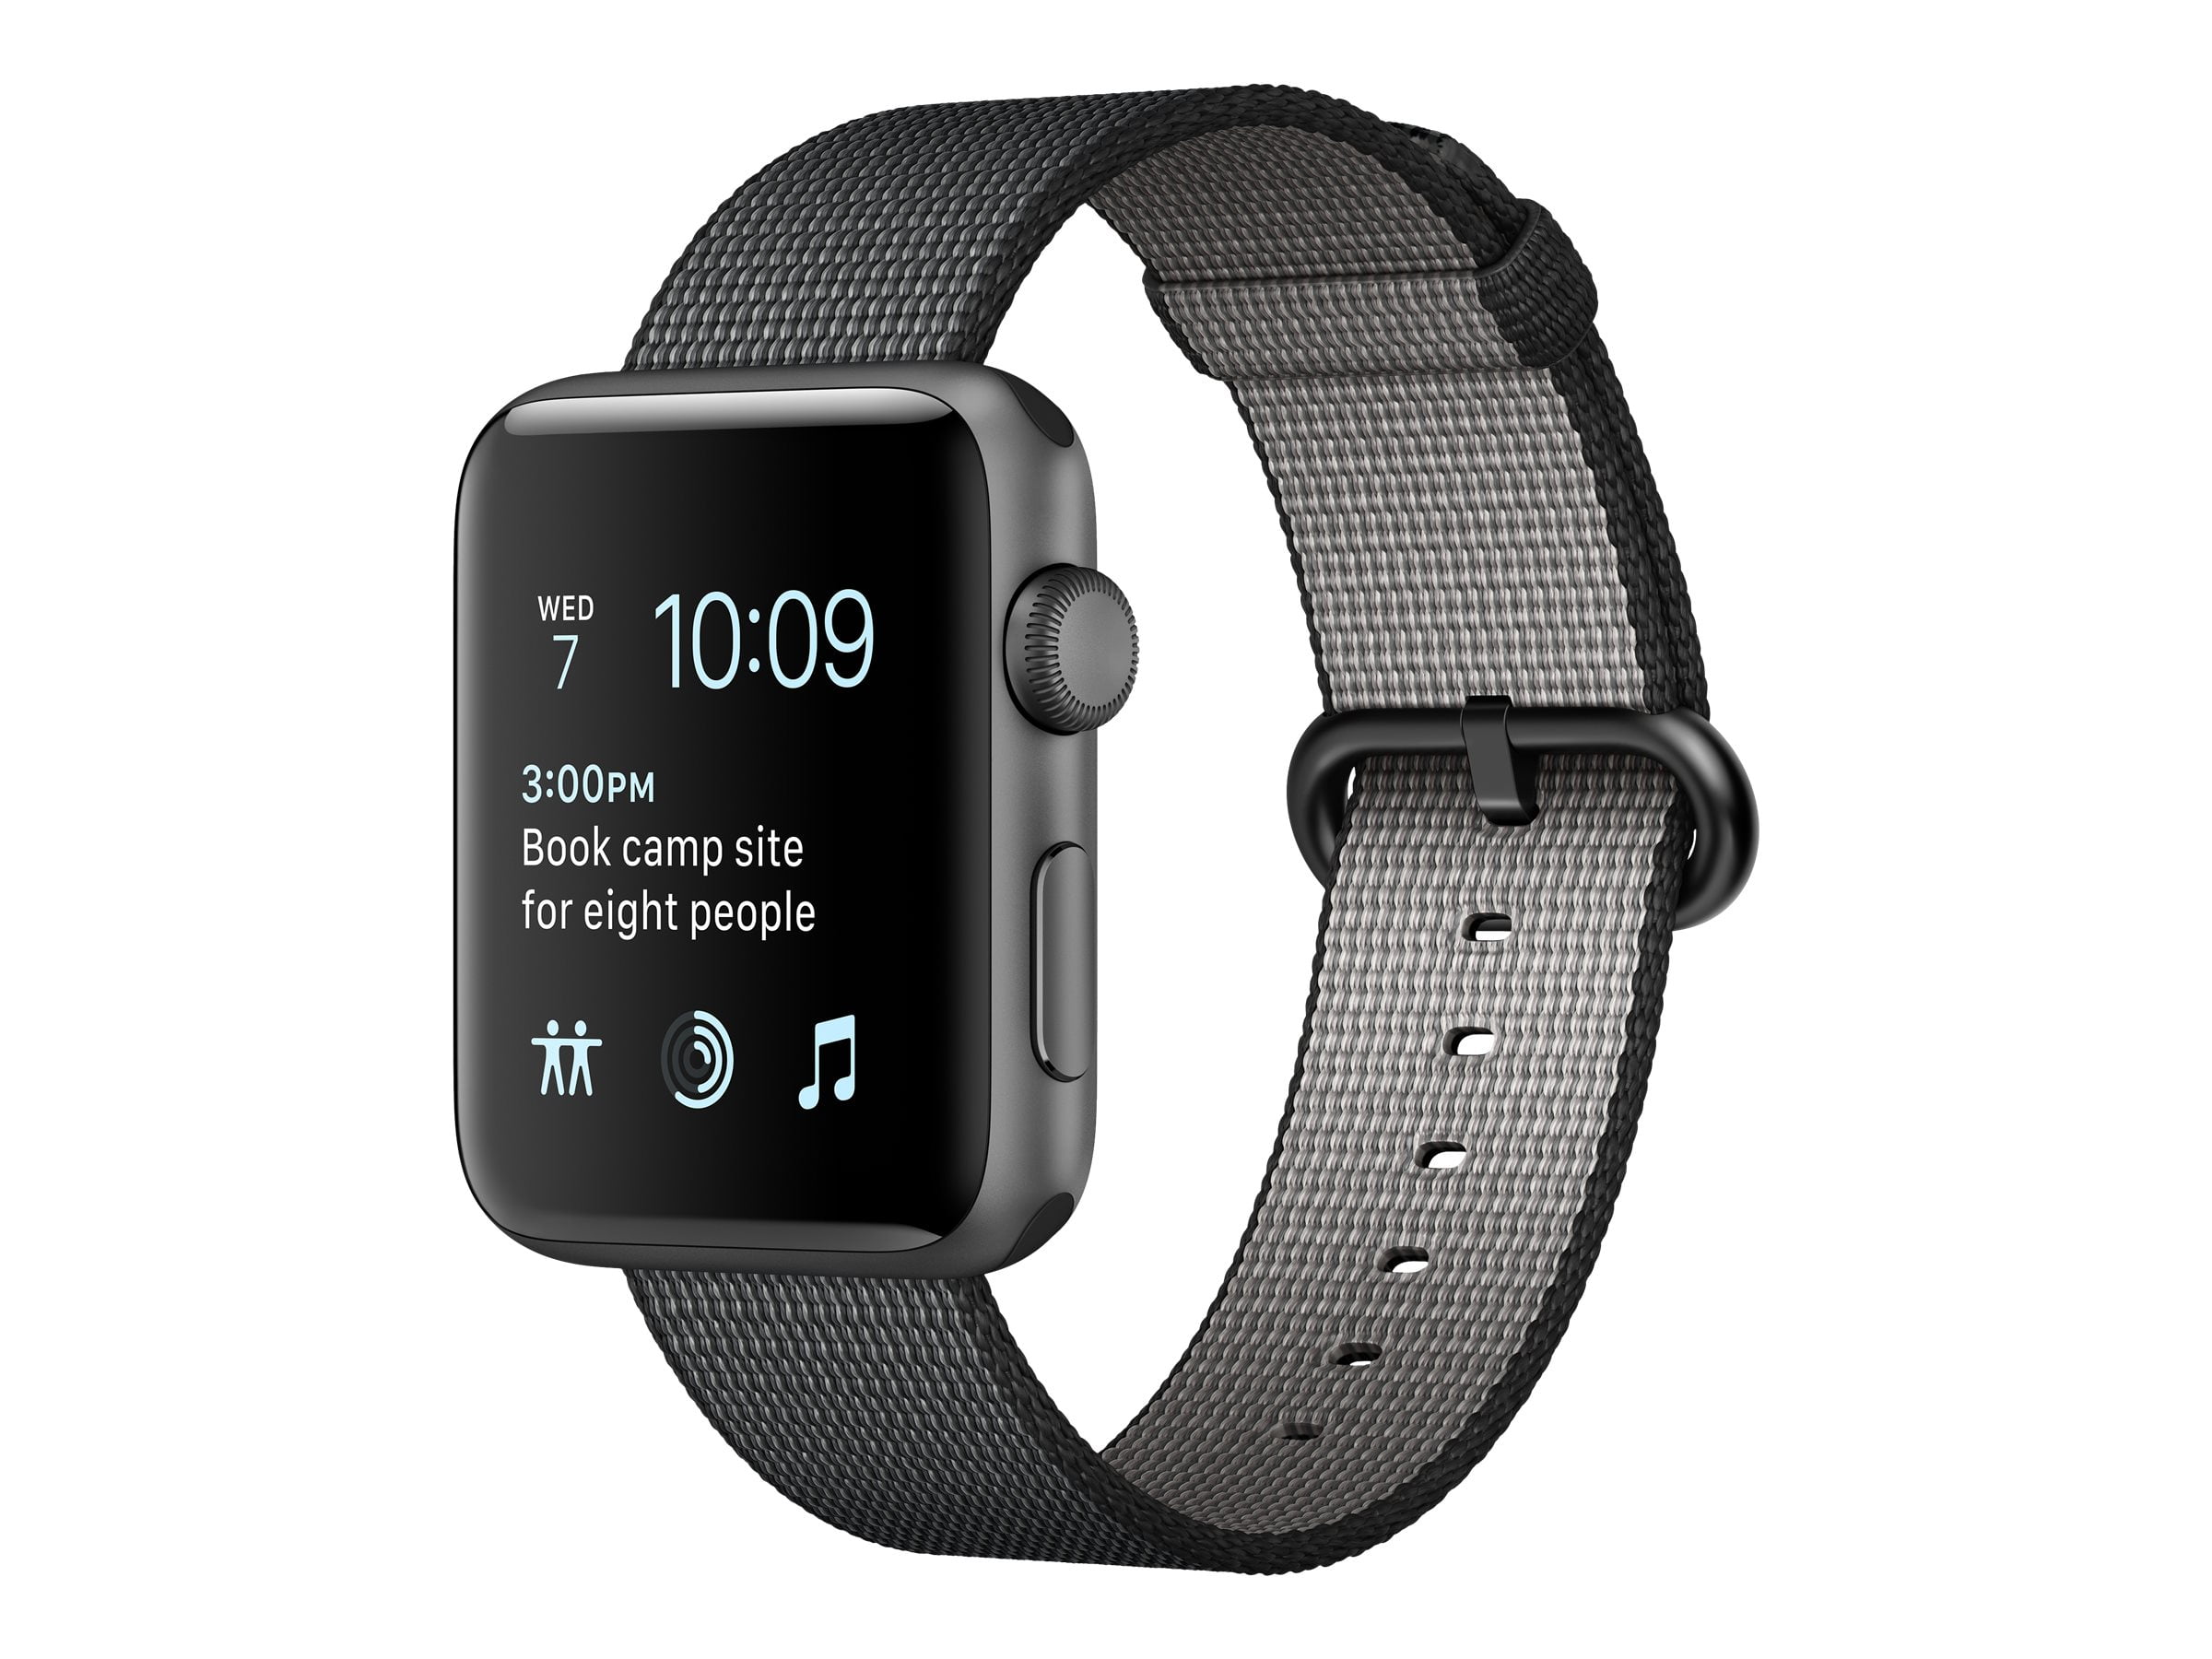 Apple Watch Series 2 - 42 mm - space gray aluminum - smart watch with band  - woven nylon - black - wrist size: 5.71 in - 8.46 in - Wi-Fi, Bluetooth -  